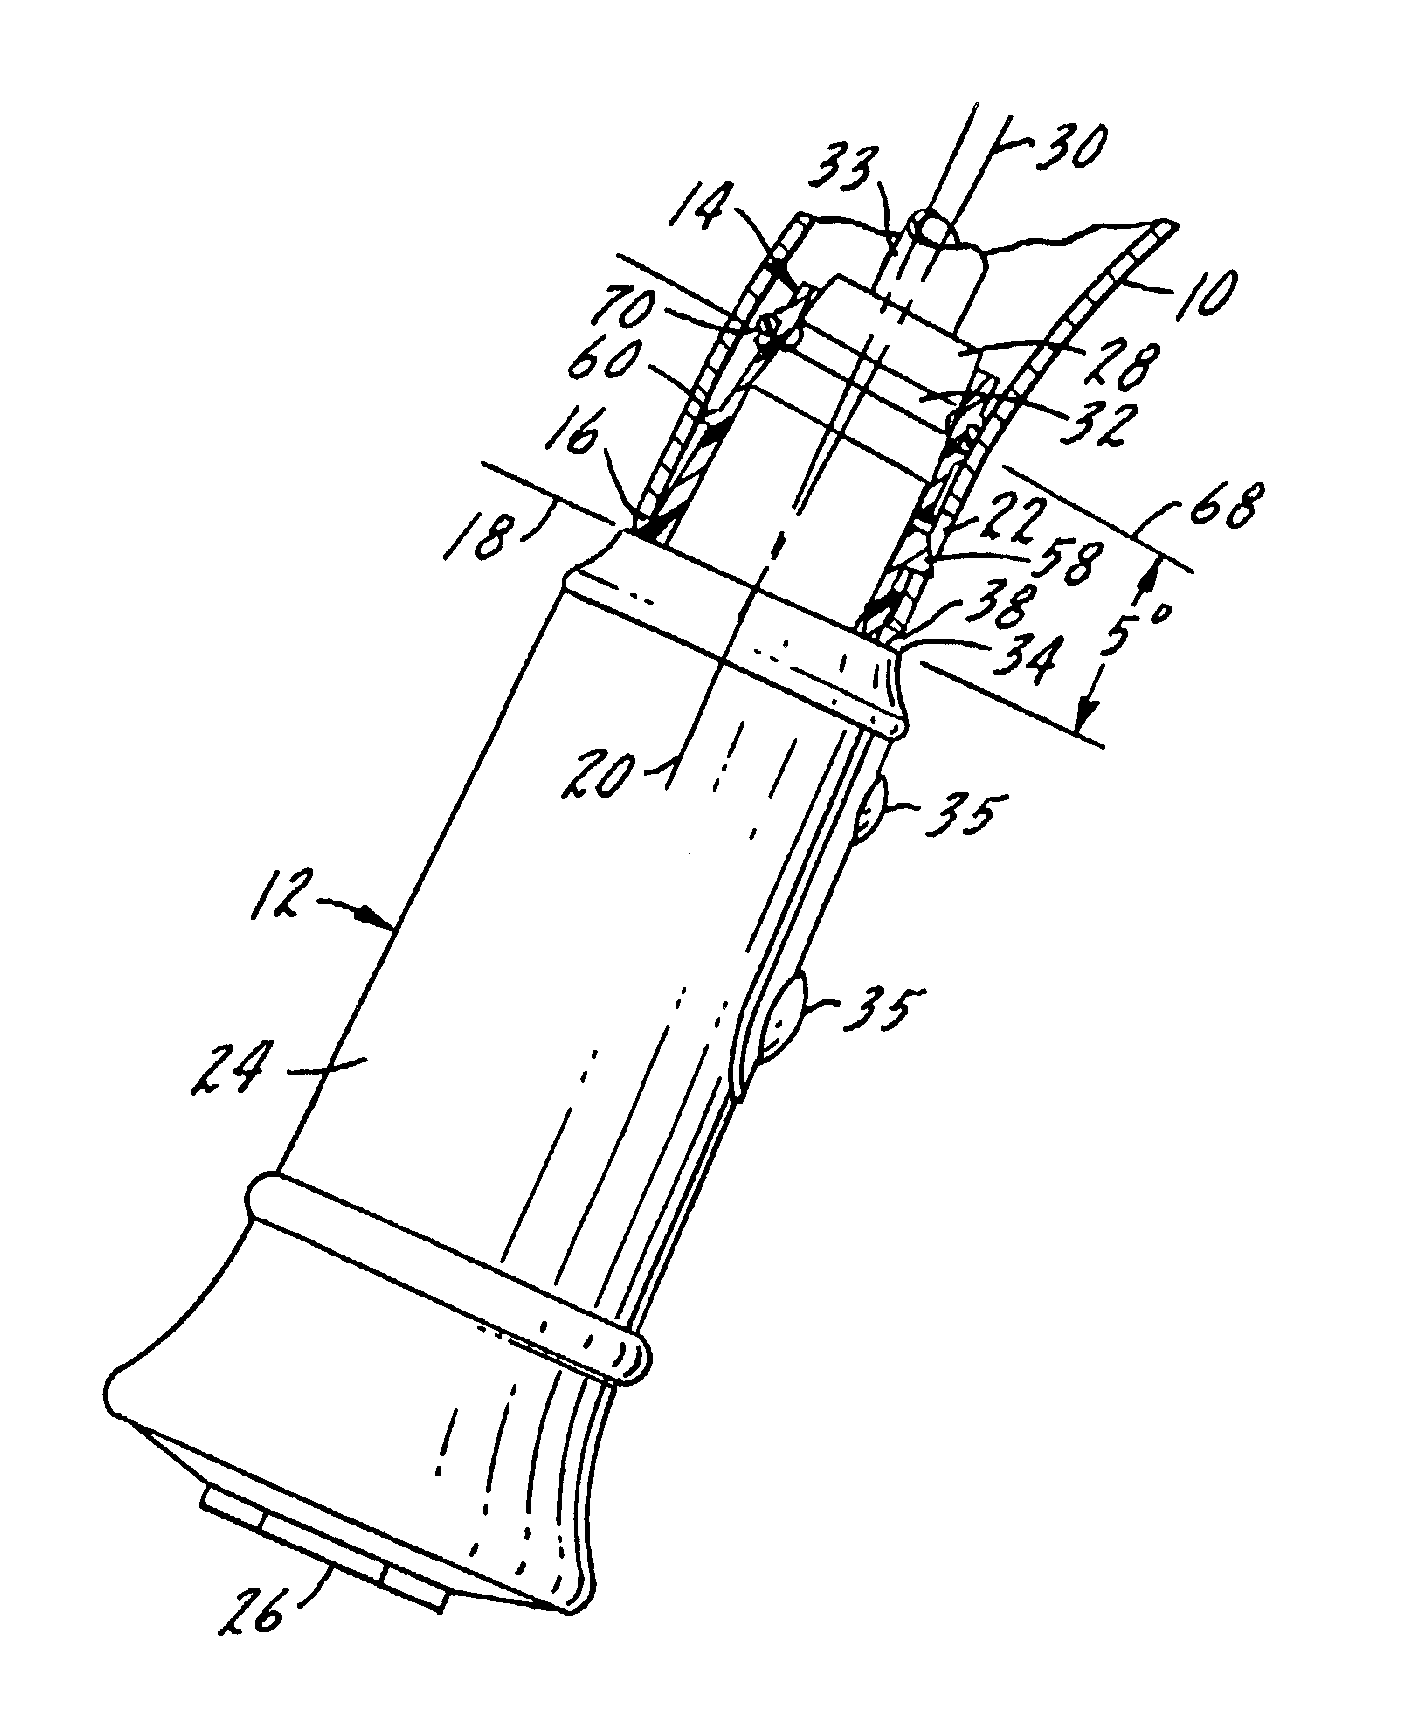 Docking collar for a faucet having a pullout spray head